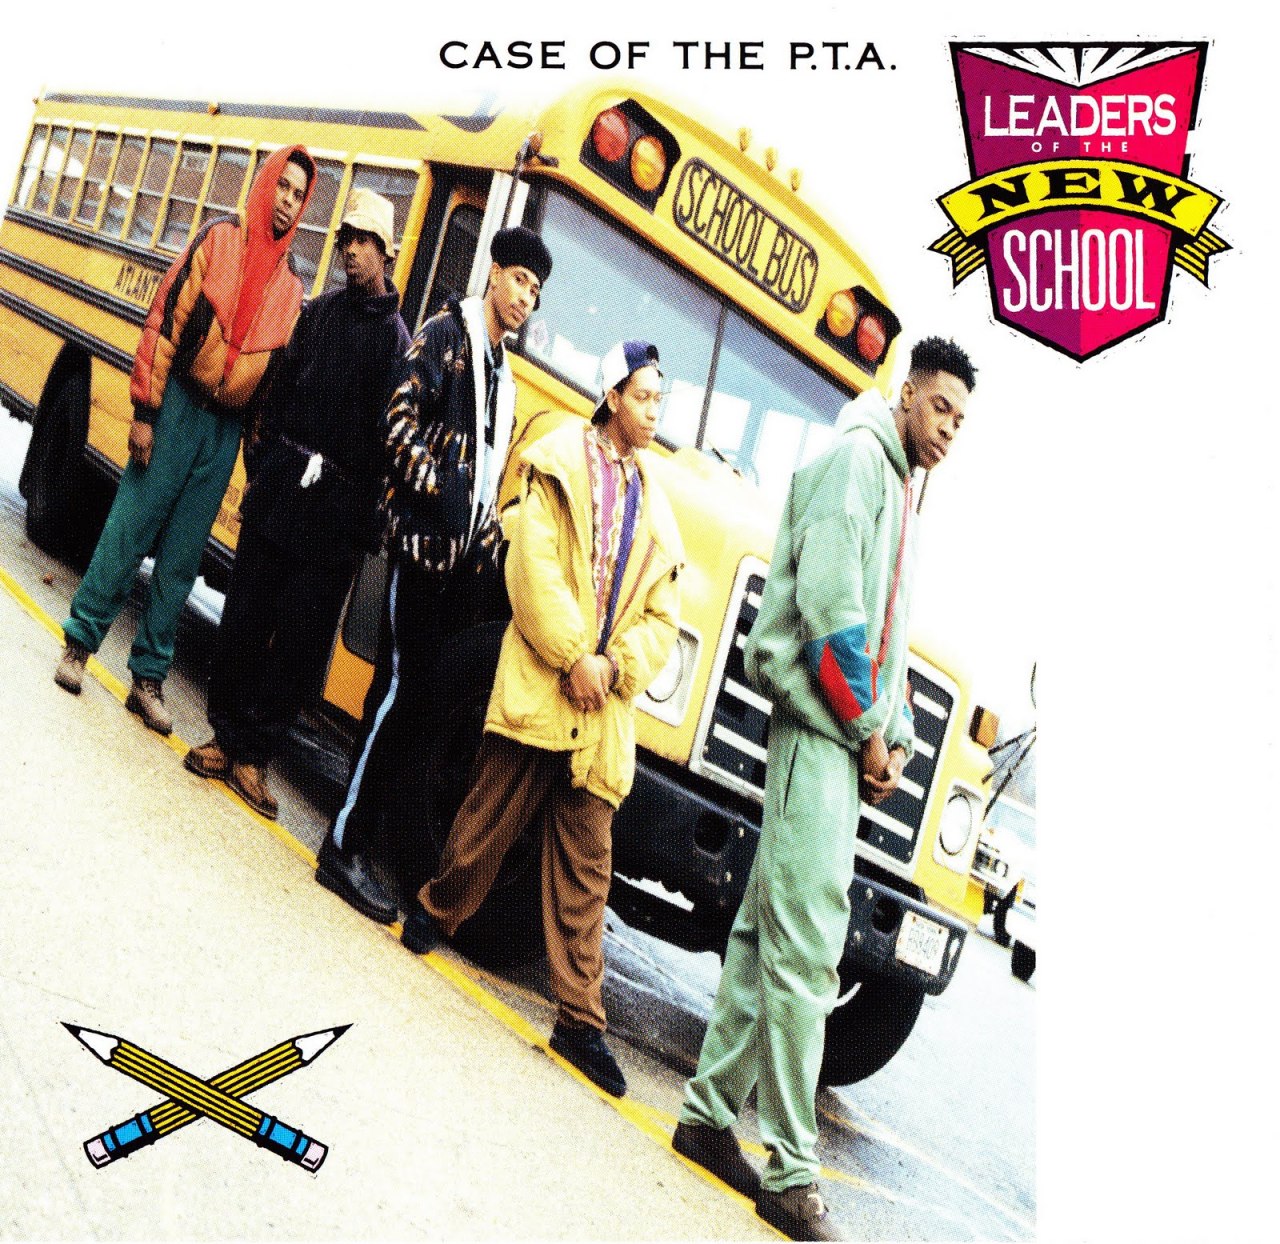 BACK IN THE DAY |2/13/91| The Leaders of The New School released their 1st single,